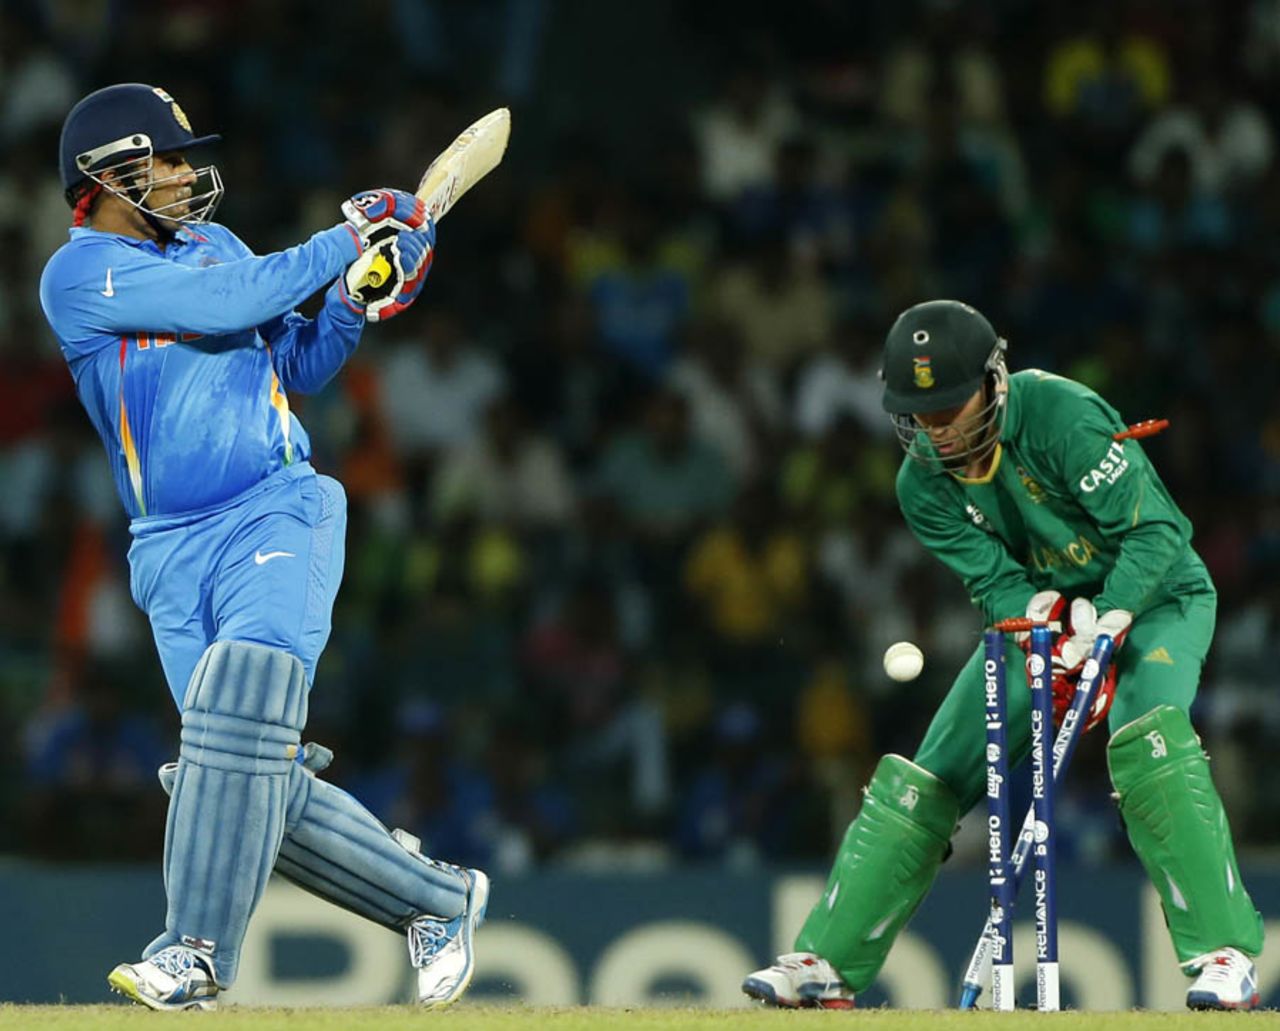 Virender Sehwag was bowled for 17, India v South Africa, Super Eights, World Twenty20, Colombo, October 2, 2012